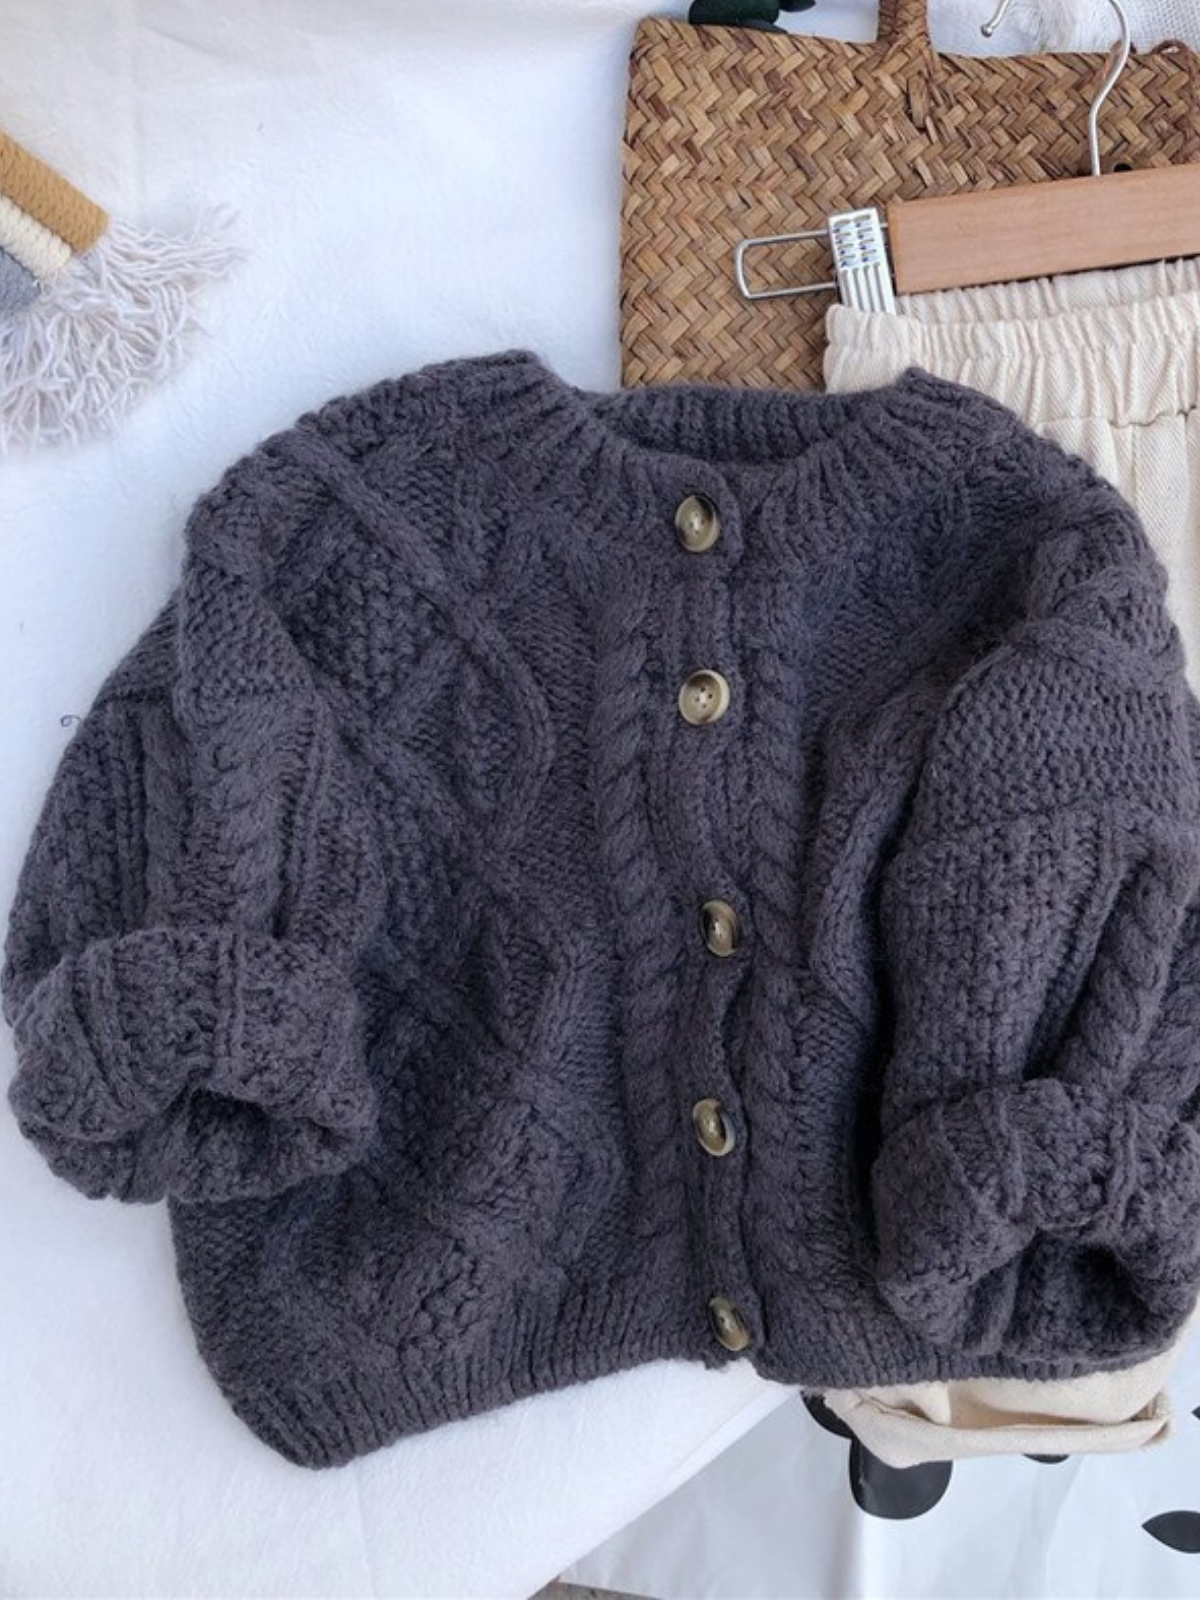 Mia Belle Girls Cable Knit Cardigan | Girls Cozy Fall